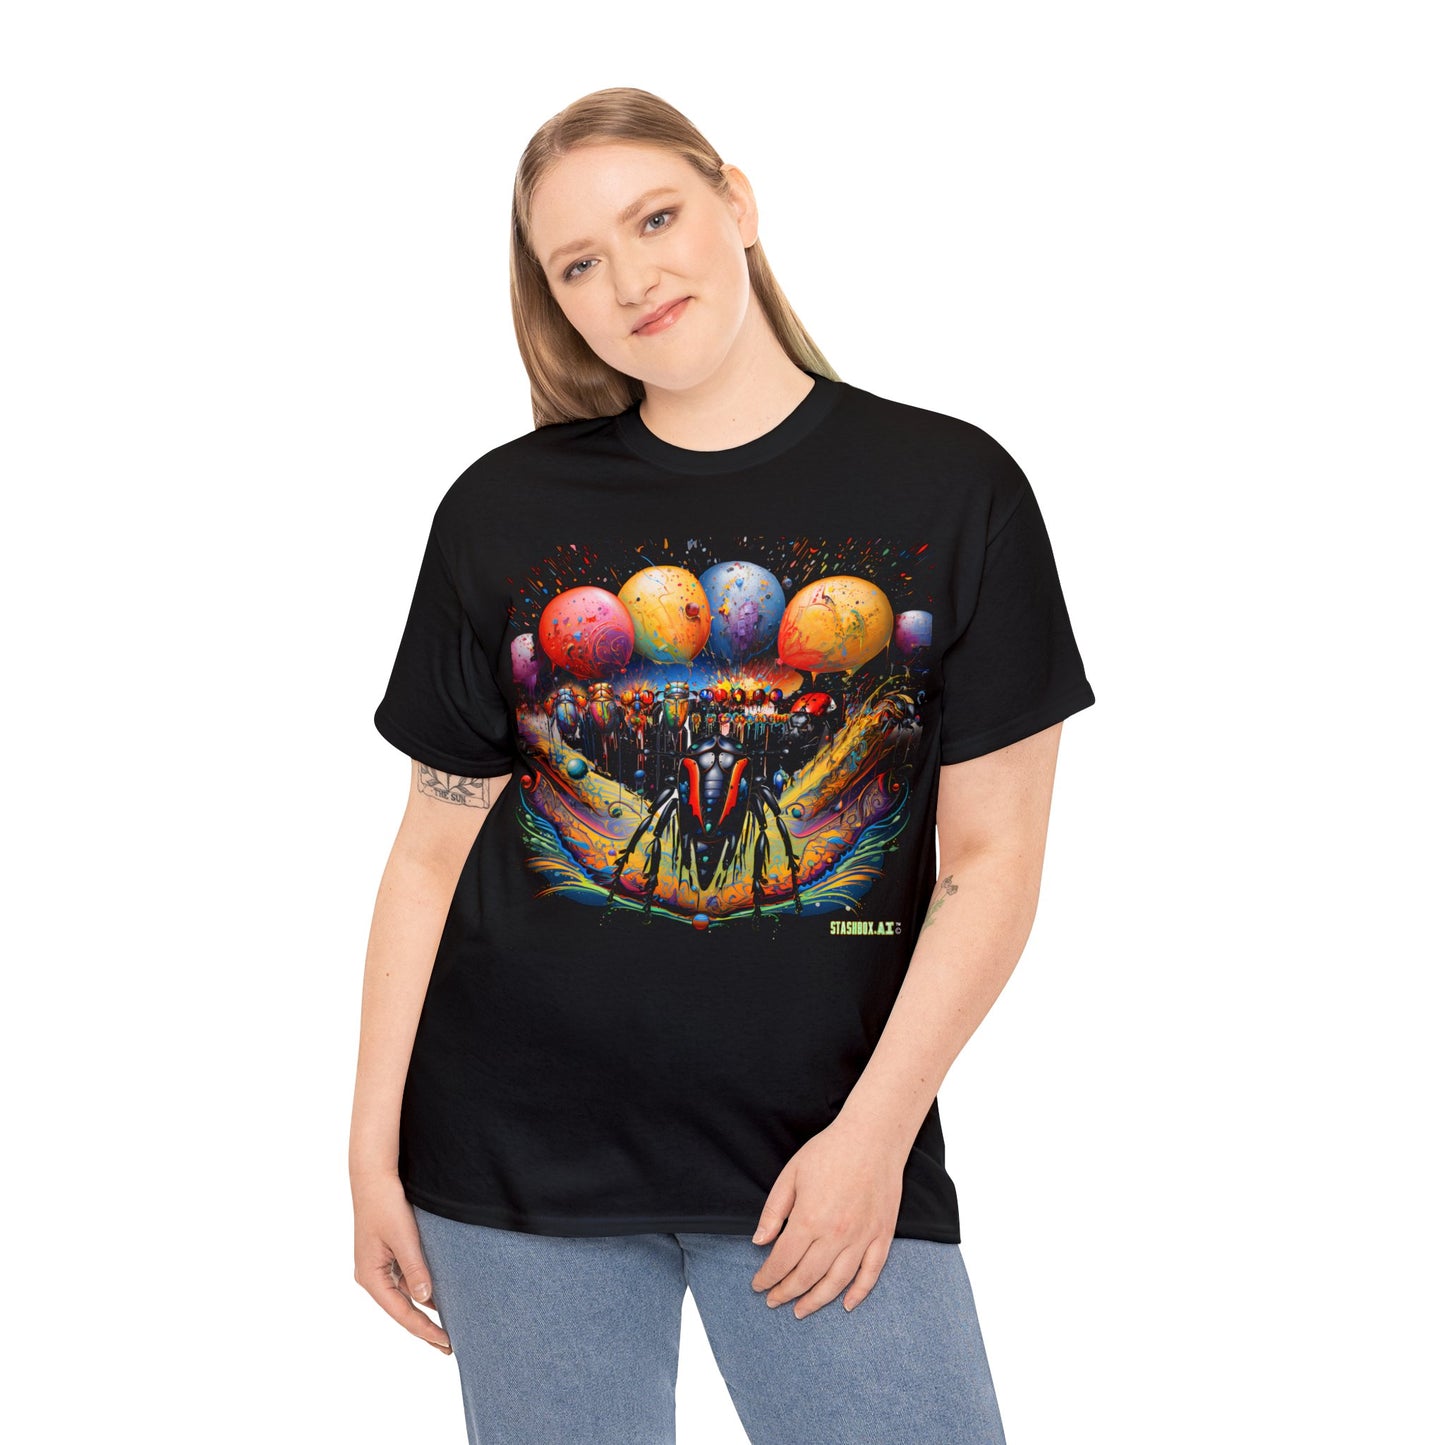 Unisex Adult Size Heavy Cotton Tee Colorful Bugs 003 T-Shirt